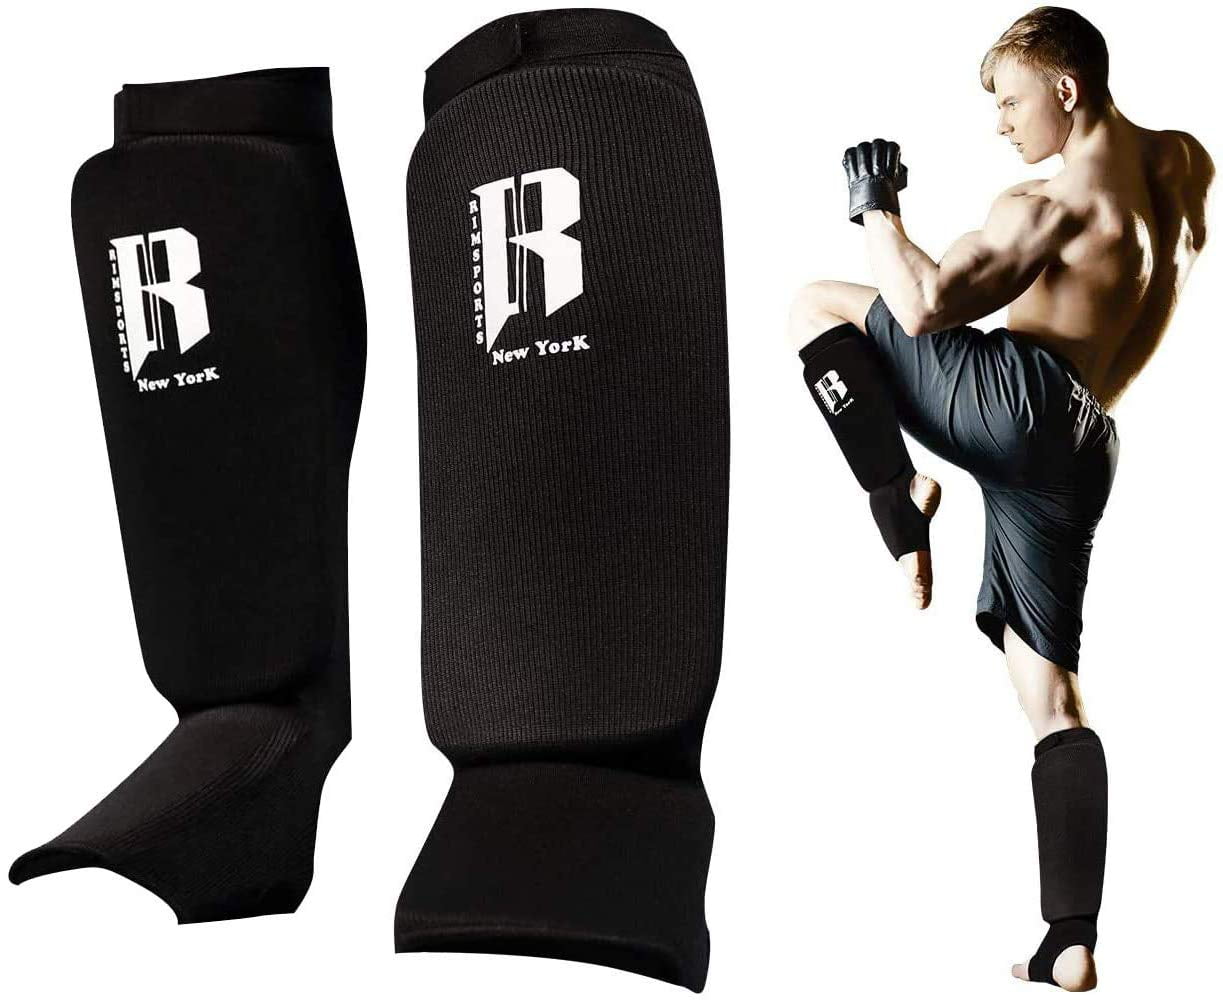 MMA Sustain Shin Guard Elastic Cloth Shin & Instep Padded Guards for Muay Thai Training Pair Sparring Protective Kickboxing 